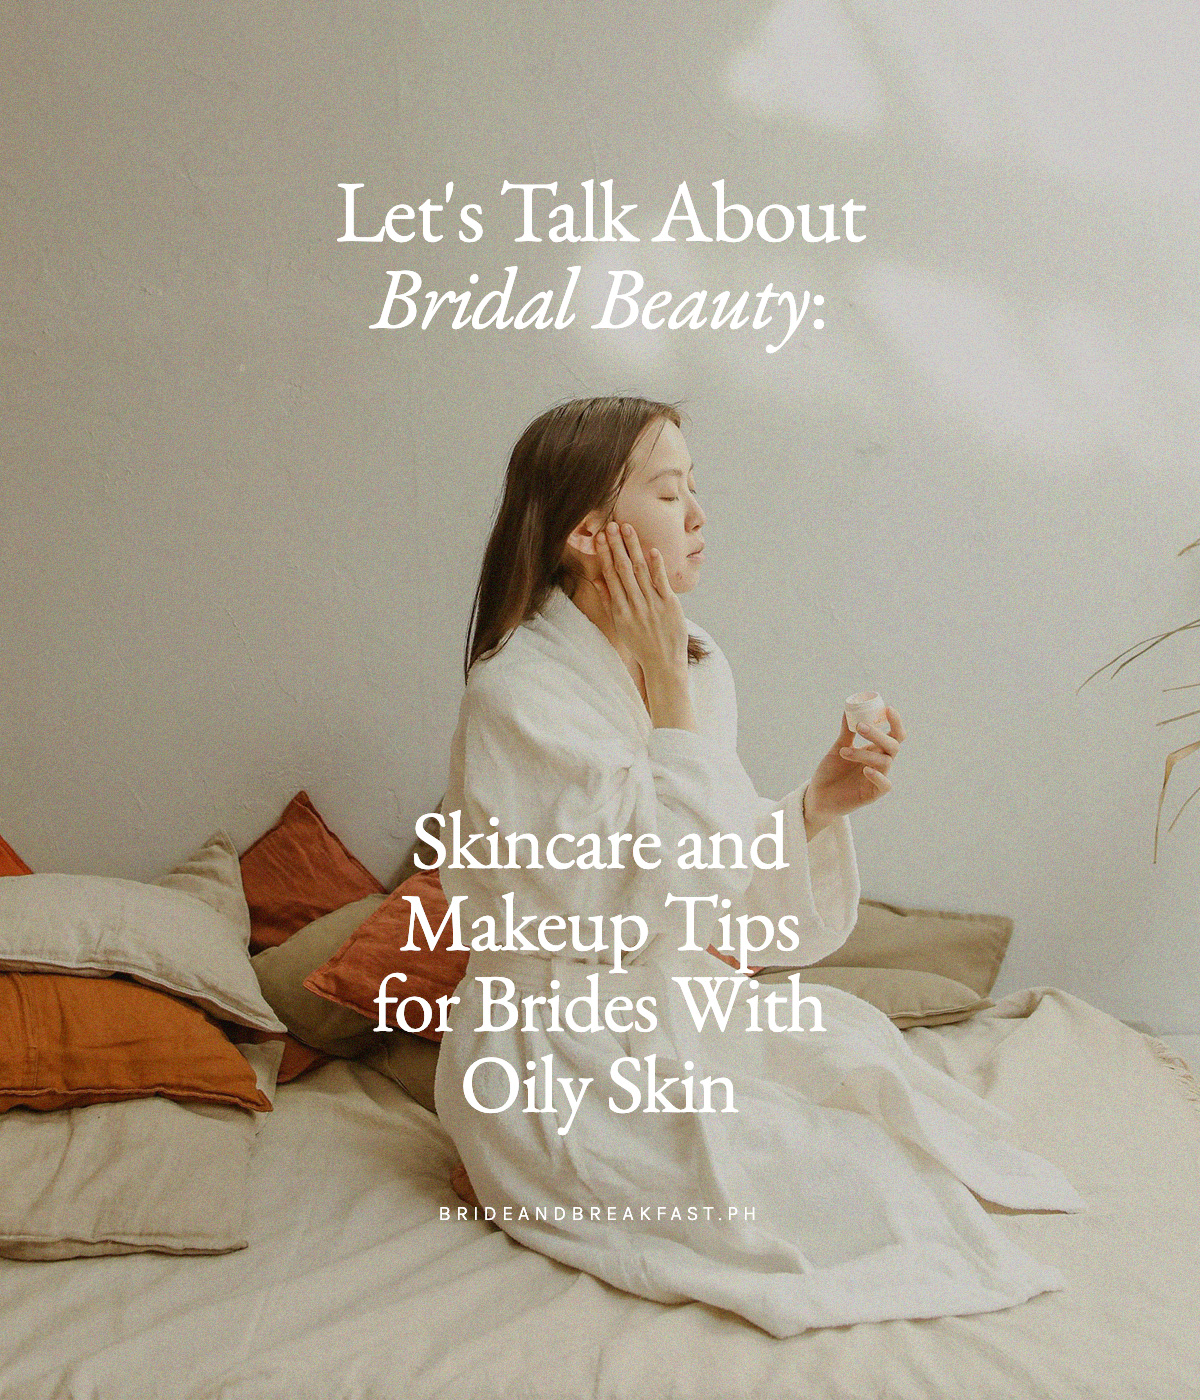 Let's Talk About Bridal Beauty: Skincare and Makeup Tips for Brides With Oily Skin